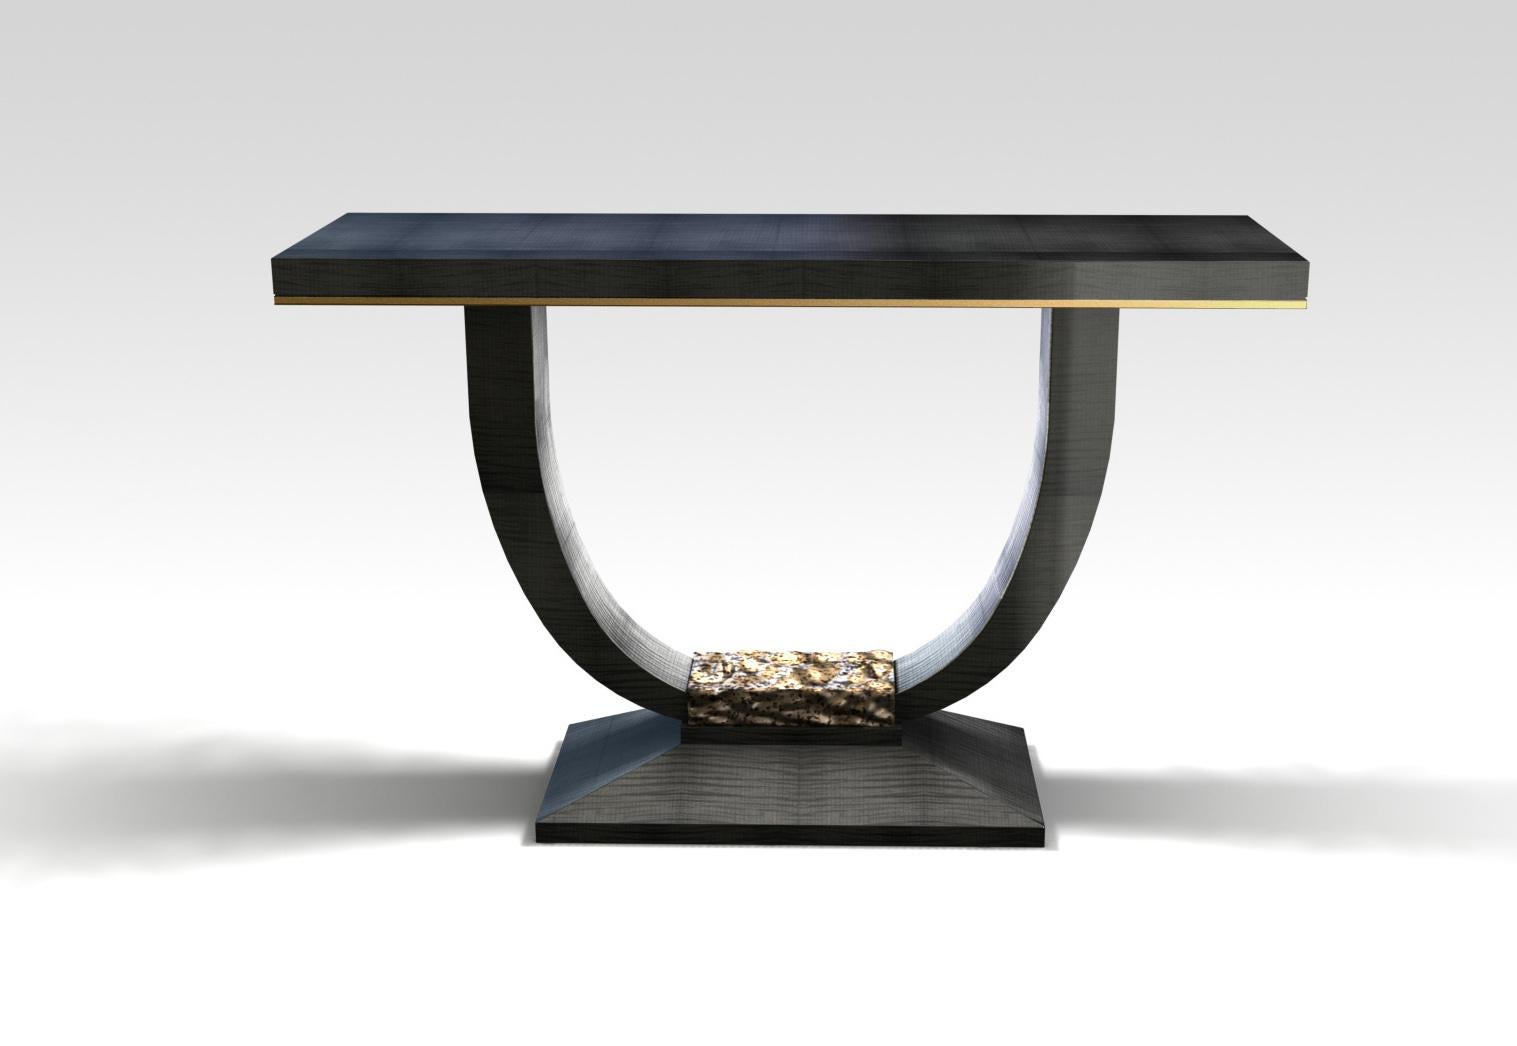 Davidson's Art Deco Albany Console Table, in Sycamore Black with Polished Nickel 2